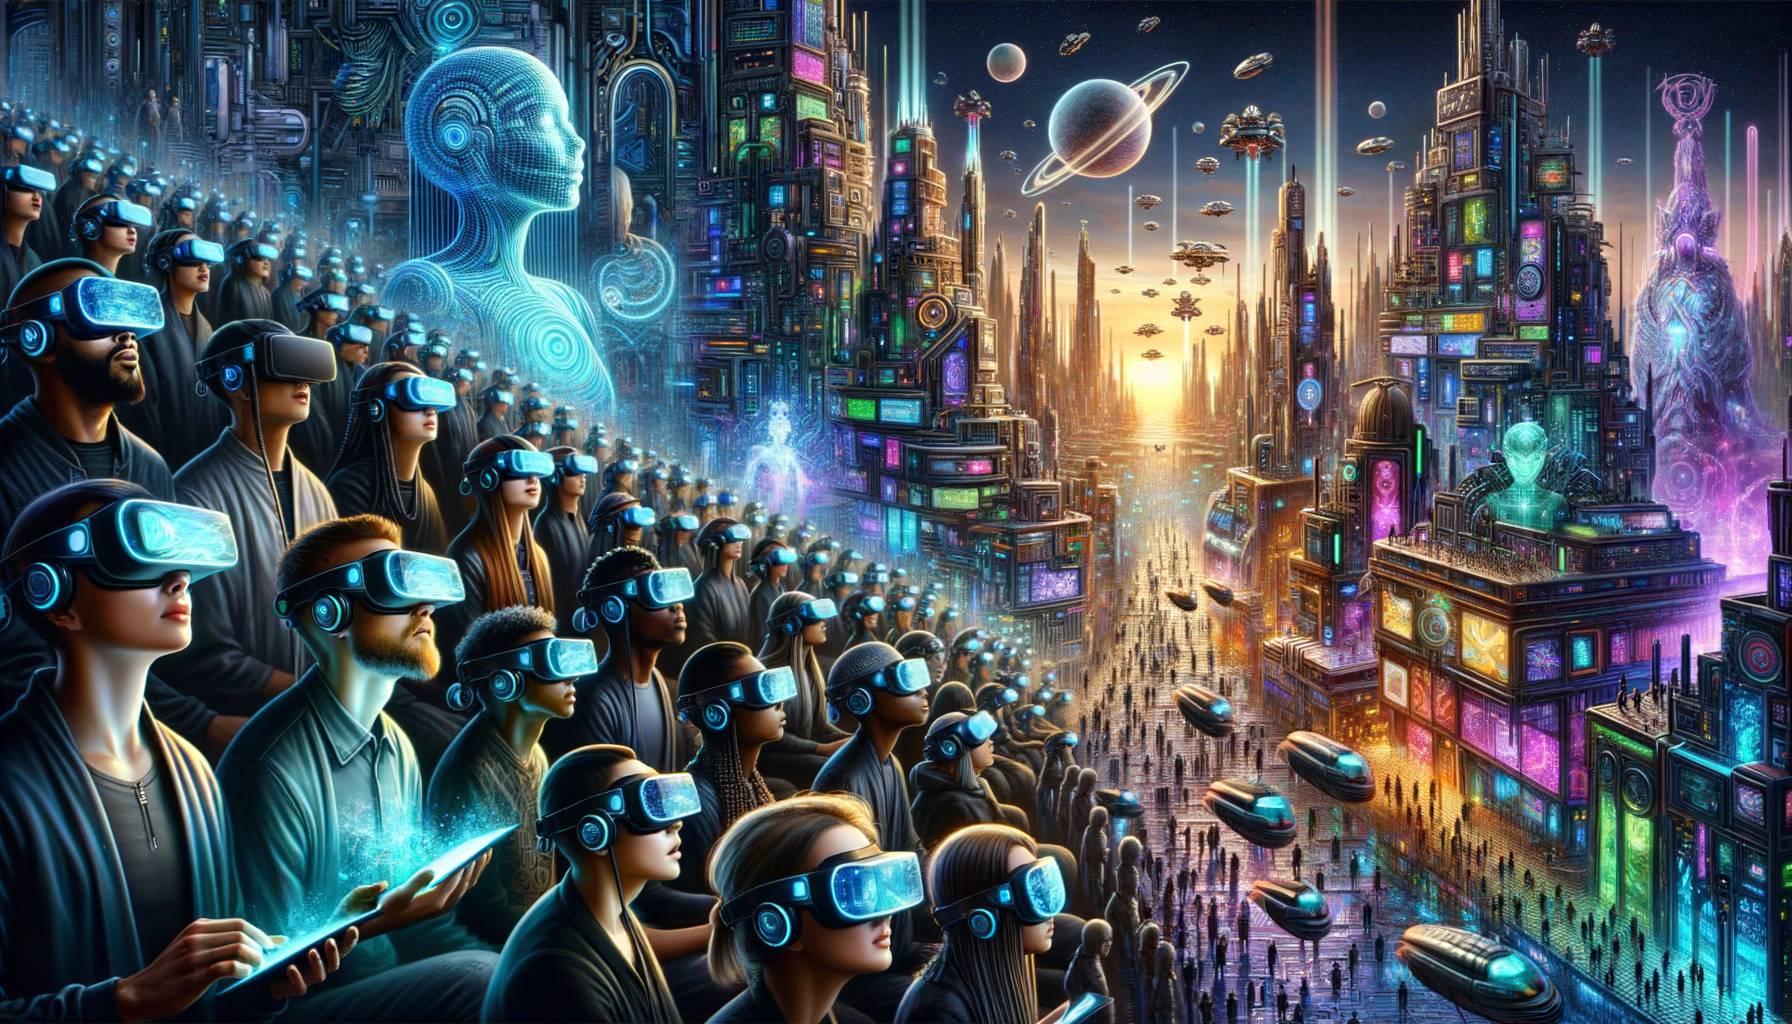 Virtual Reality Worlds: Inspired by Ready Player One